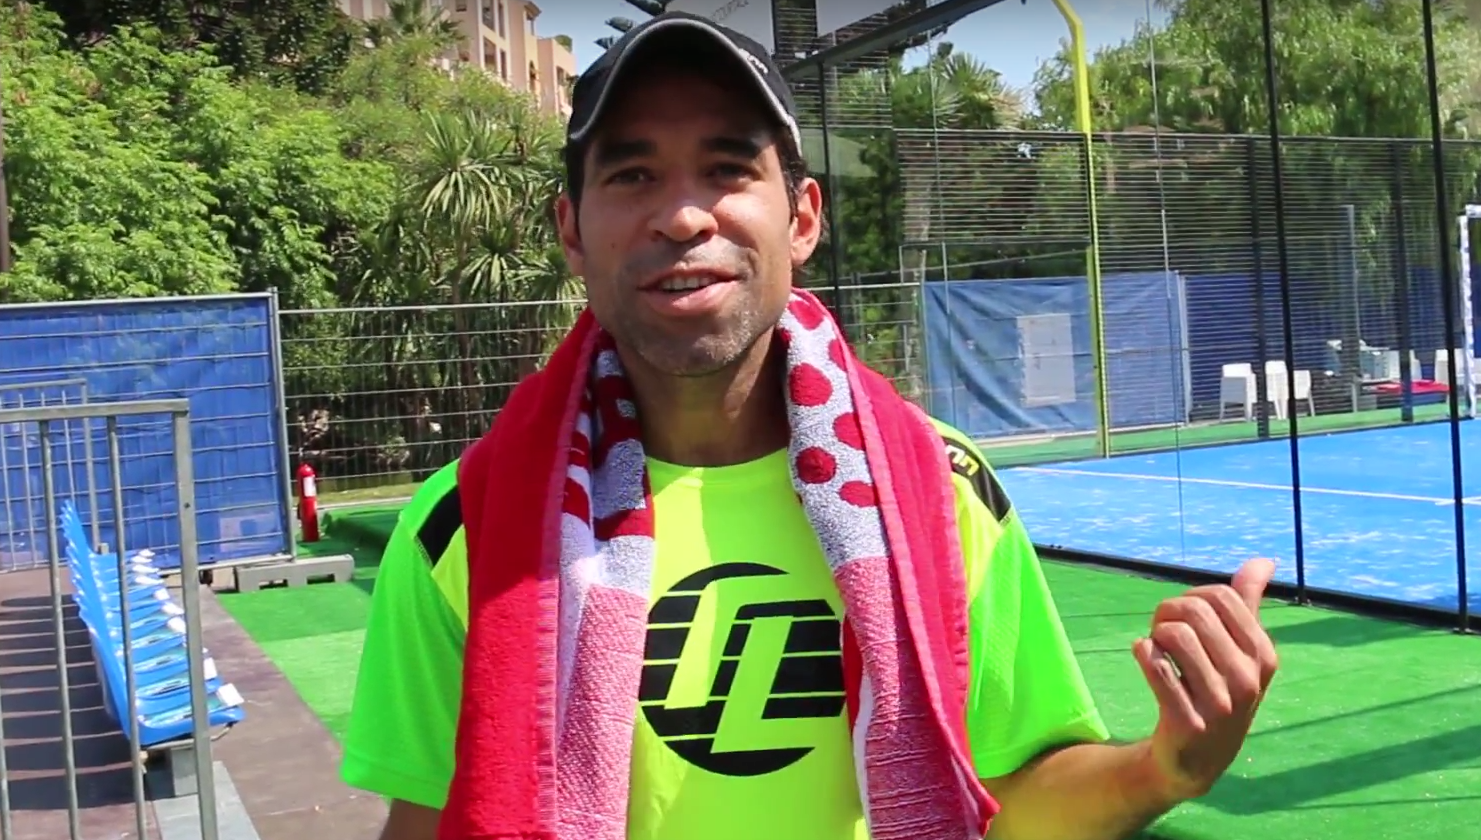 Clément Forget, soon at World Padel Tour ?